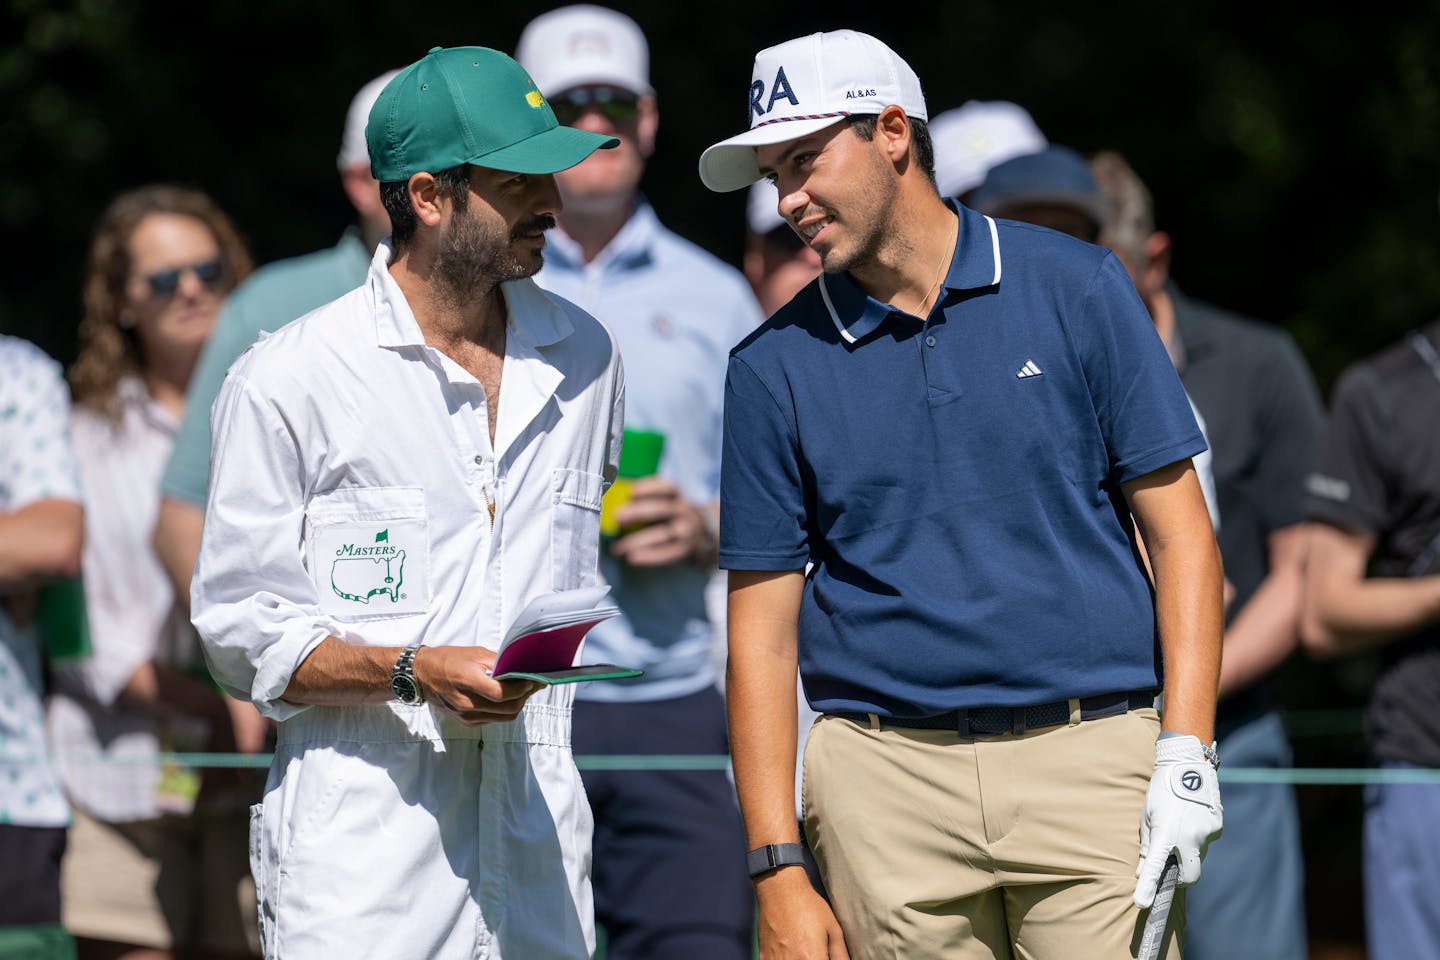 Santiago de la Fuente of Mexico speaks with his caddie on the No. 7 tee during practice round 1 prior to the start of the 2024 Masters Tournament